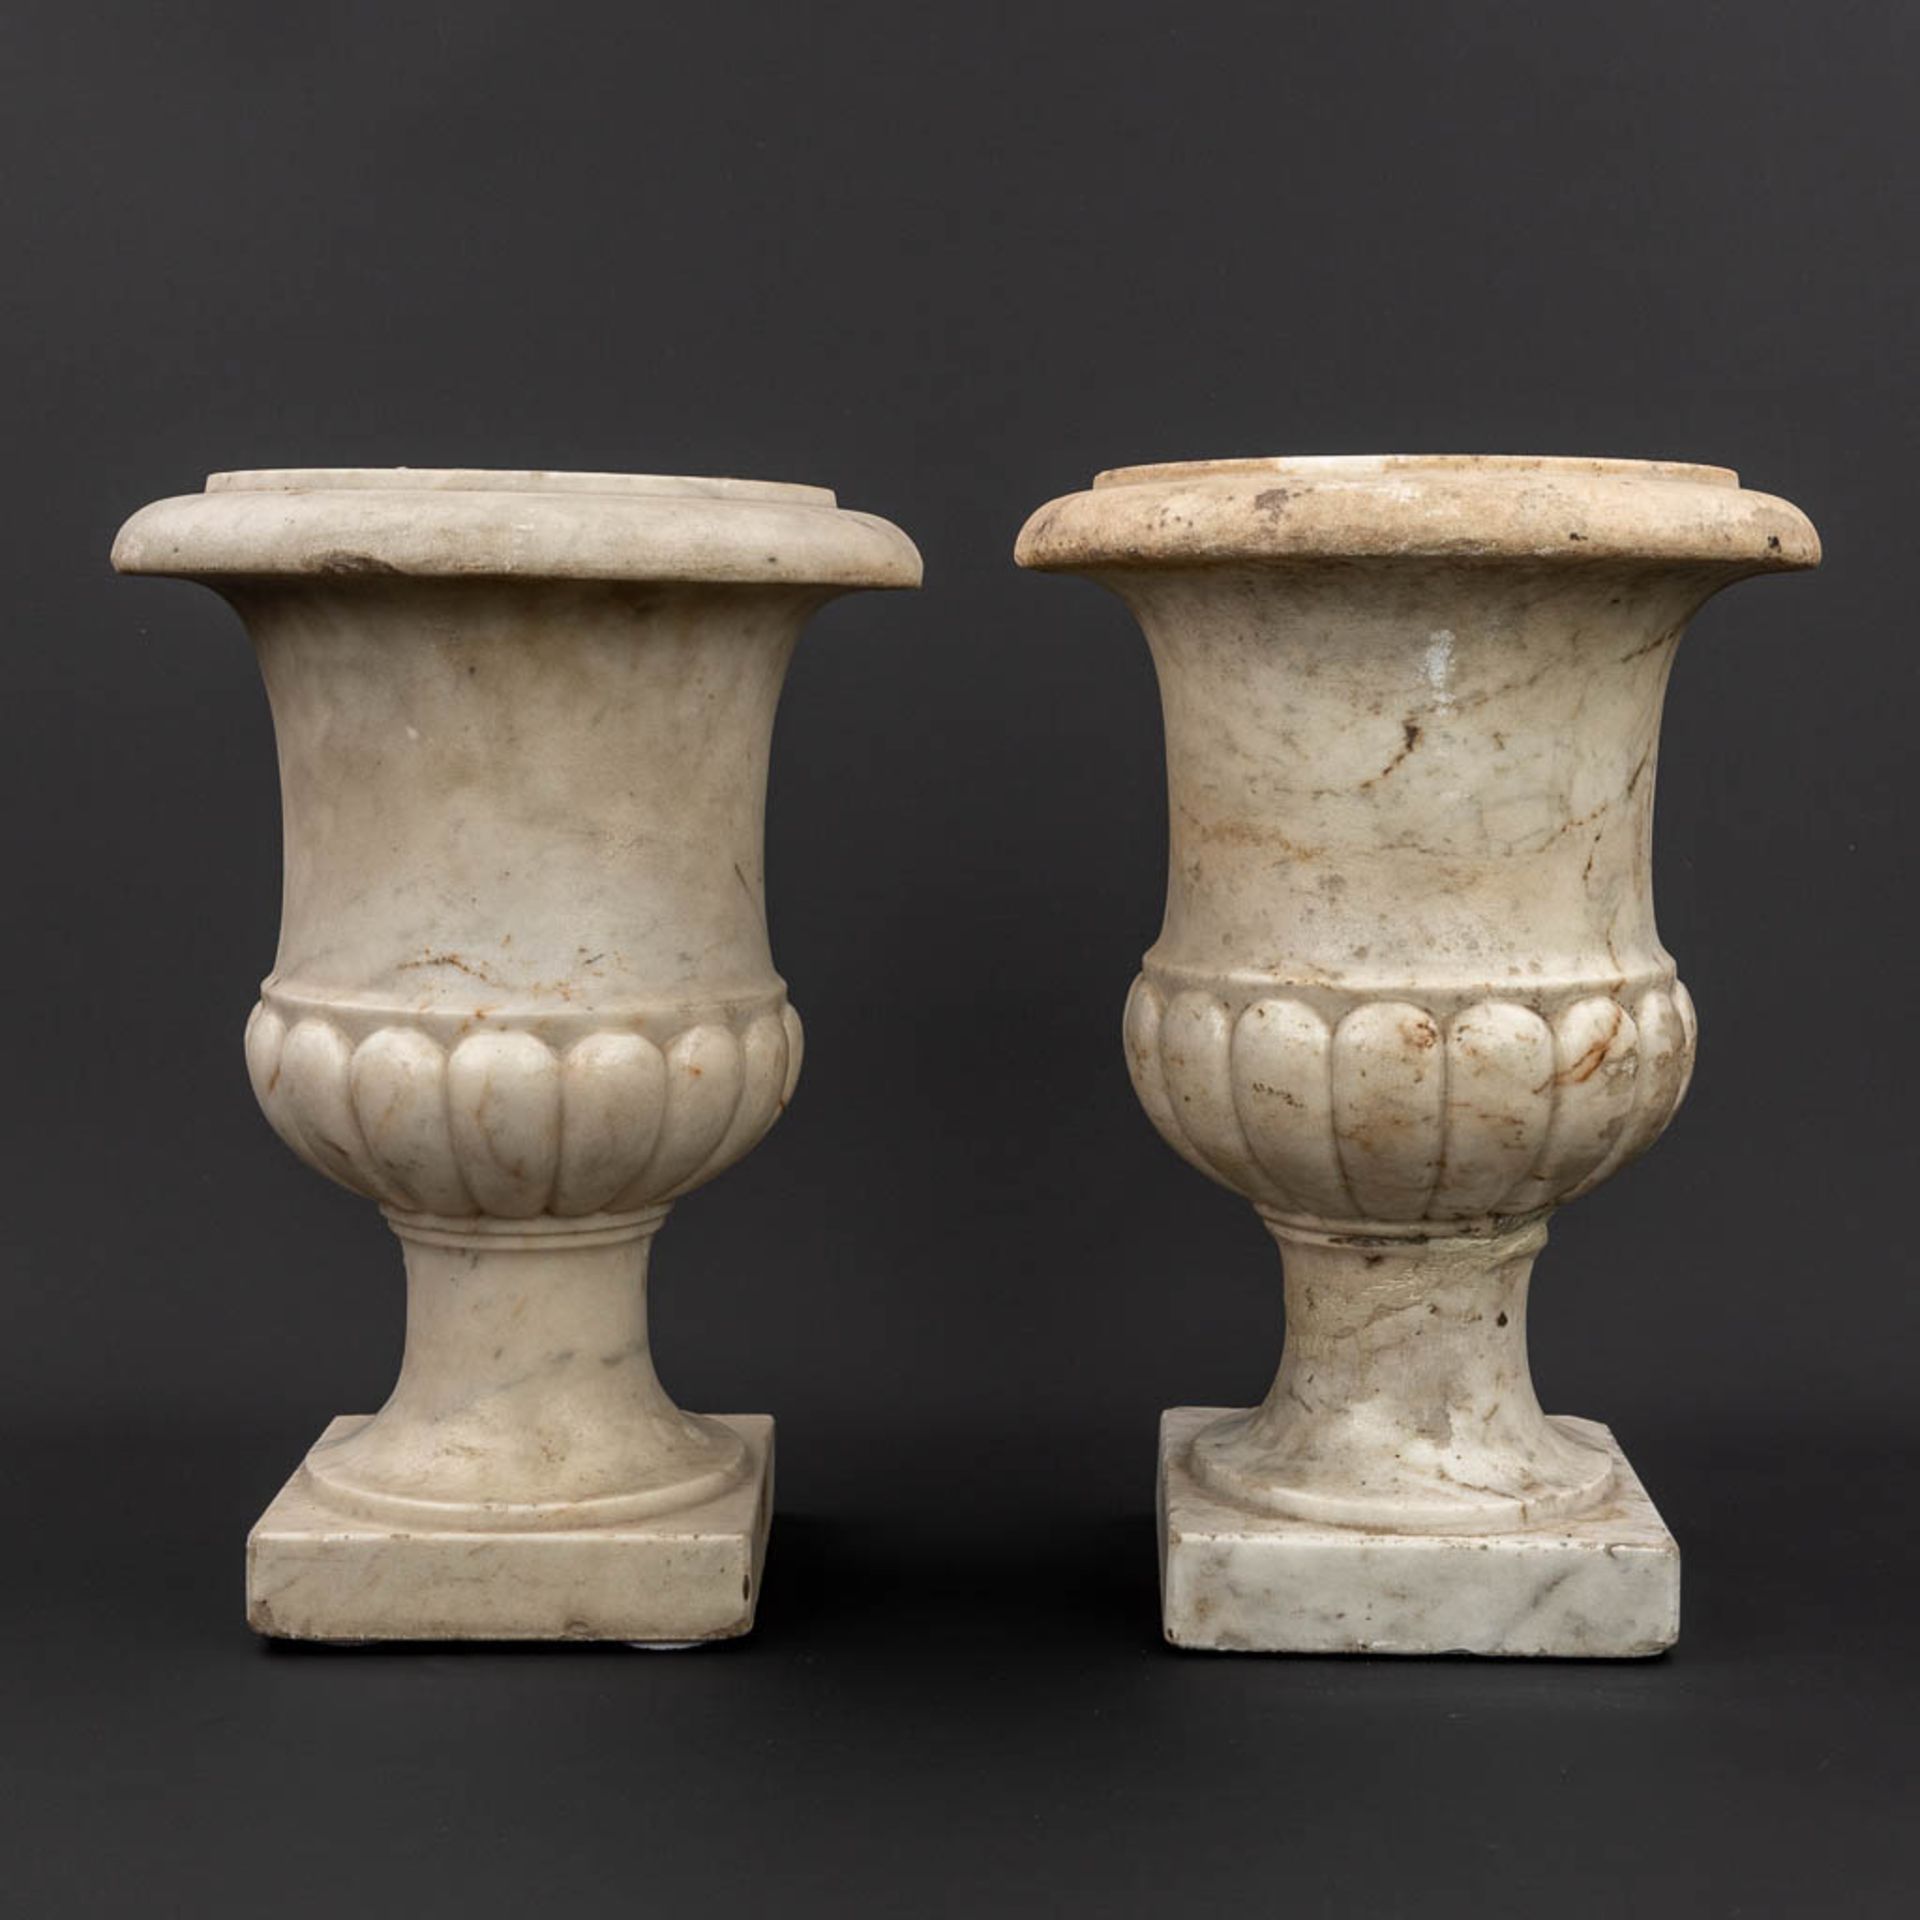 A pair of marble urns 'Medici Vases' made of sculptured marble, 18th C. (H:36 x D:26 cm) - Image 4 of 11